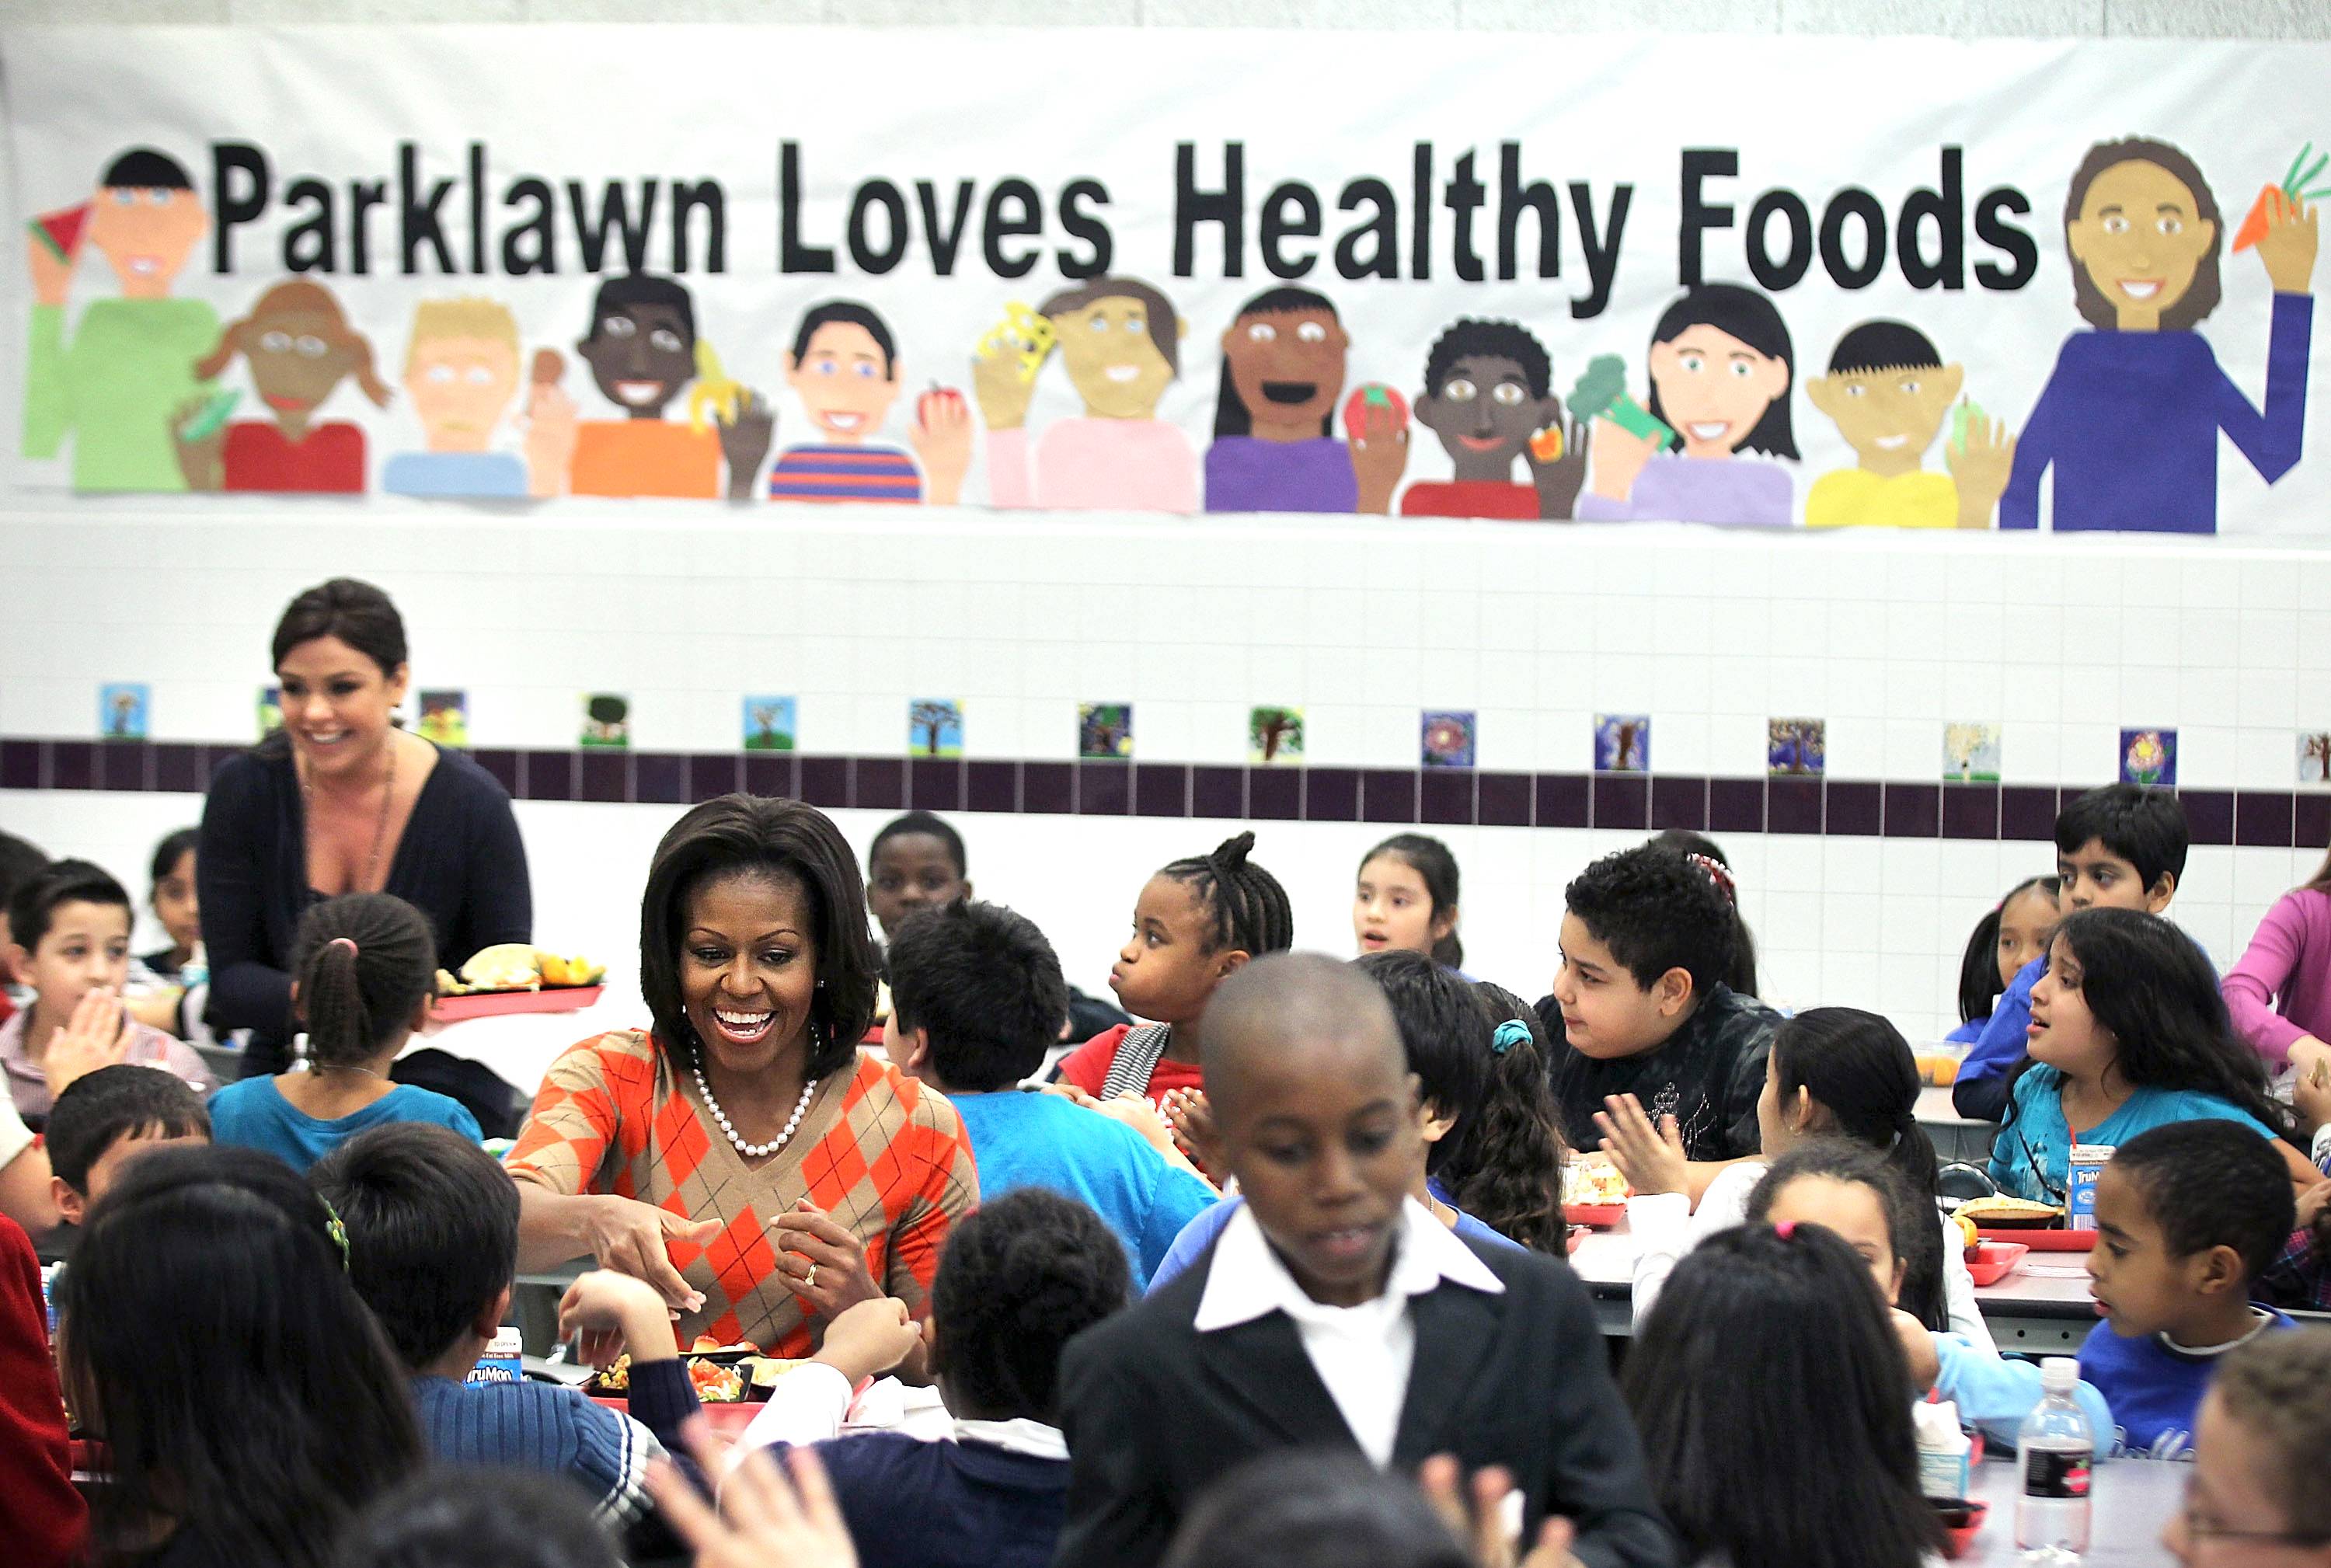 Michelle Obama Announces New School Lunch Nutrition Guidelines - First Lady&nbsp;Michelle Obama&nbsp;and&nbsp;Agriculture Secretary Tom Vilsack&nbsp;announced Thursday that soon school meals will have less sodium, and will include more whole grains and more fruits and vegetables as sides. The new rules will go into effect in the 2012-13 school year.(Photo: Alex Wong/Getty Images)